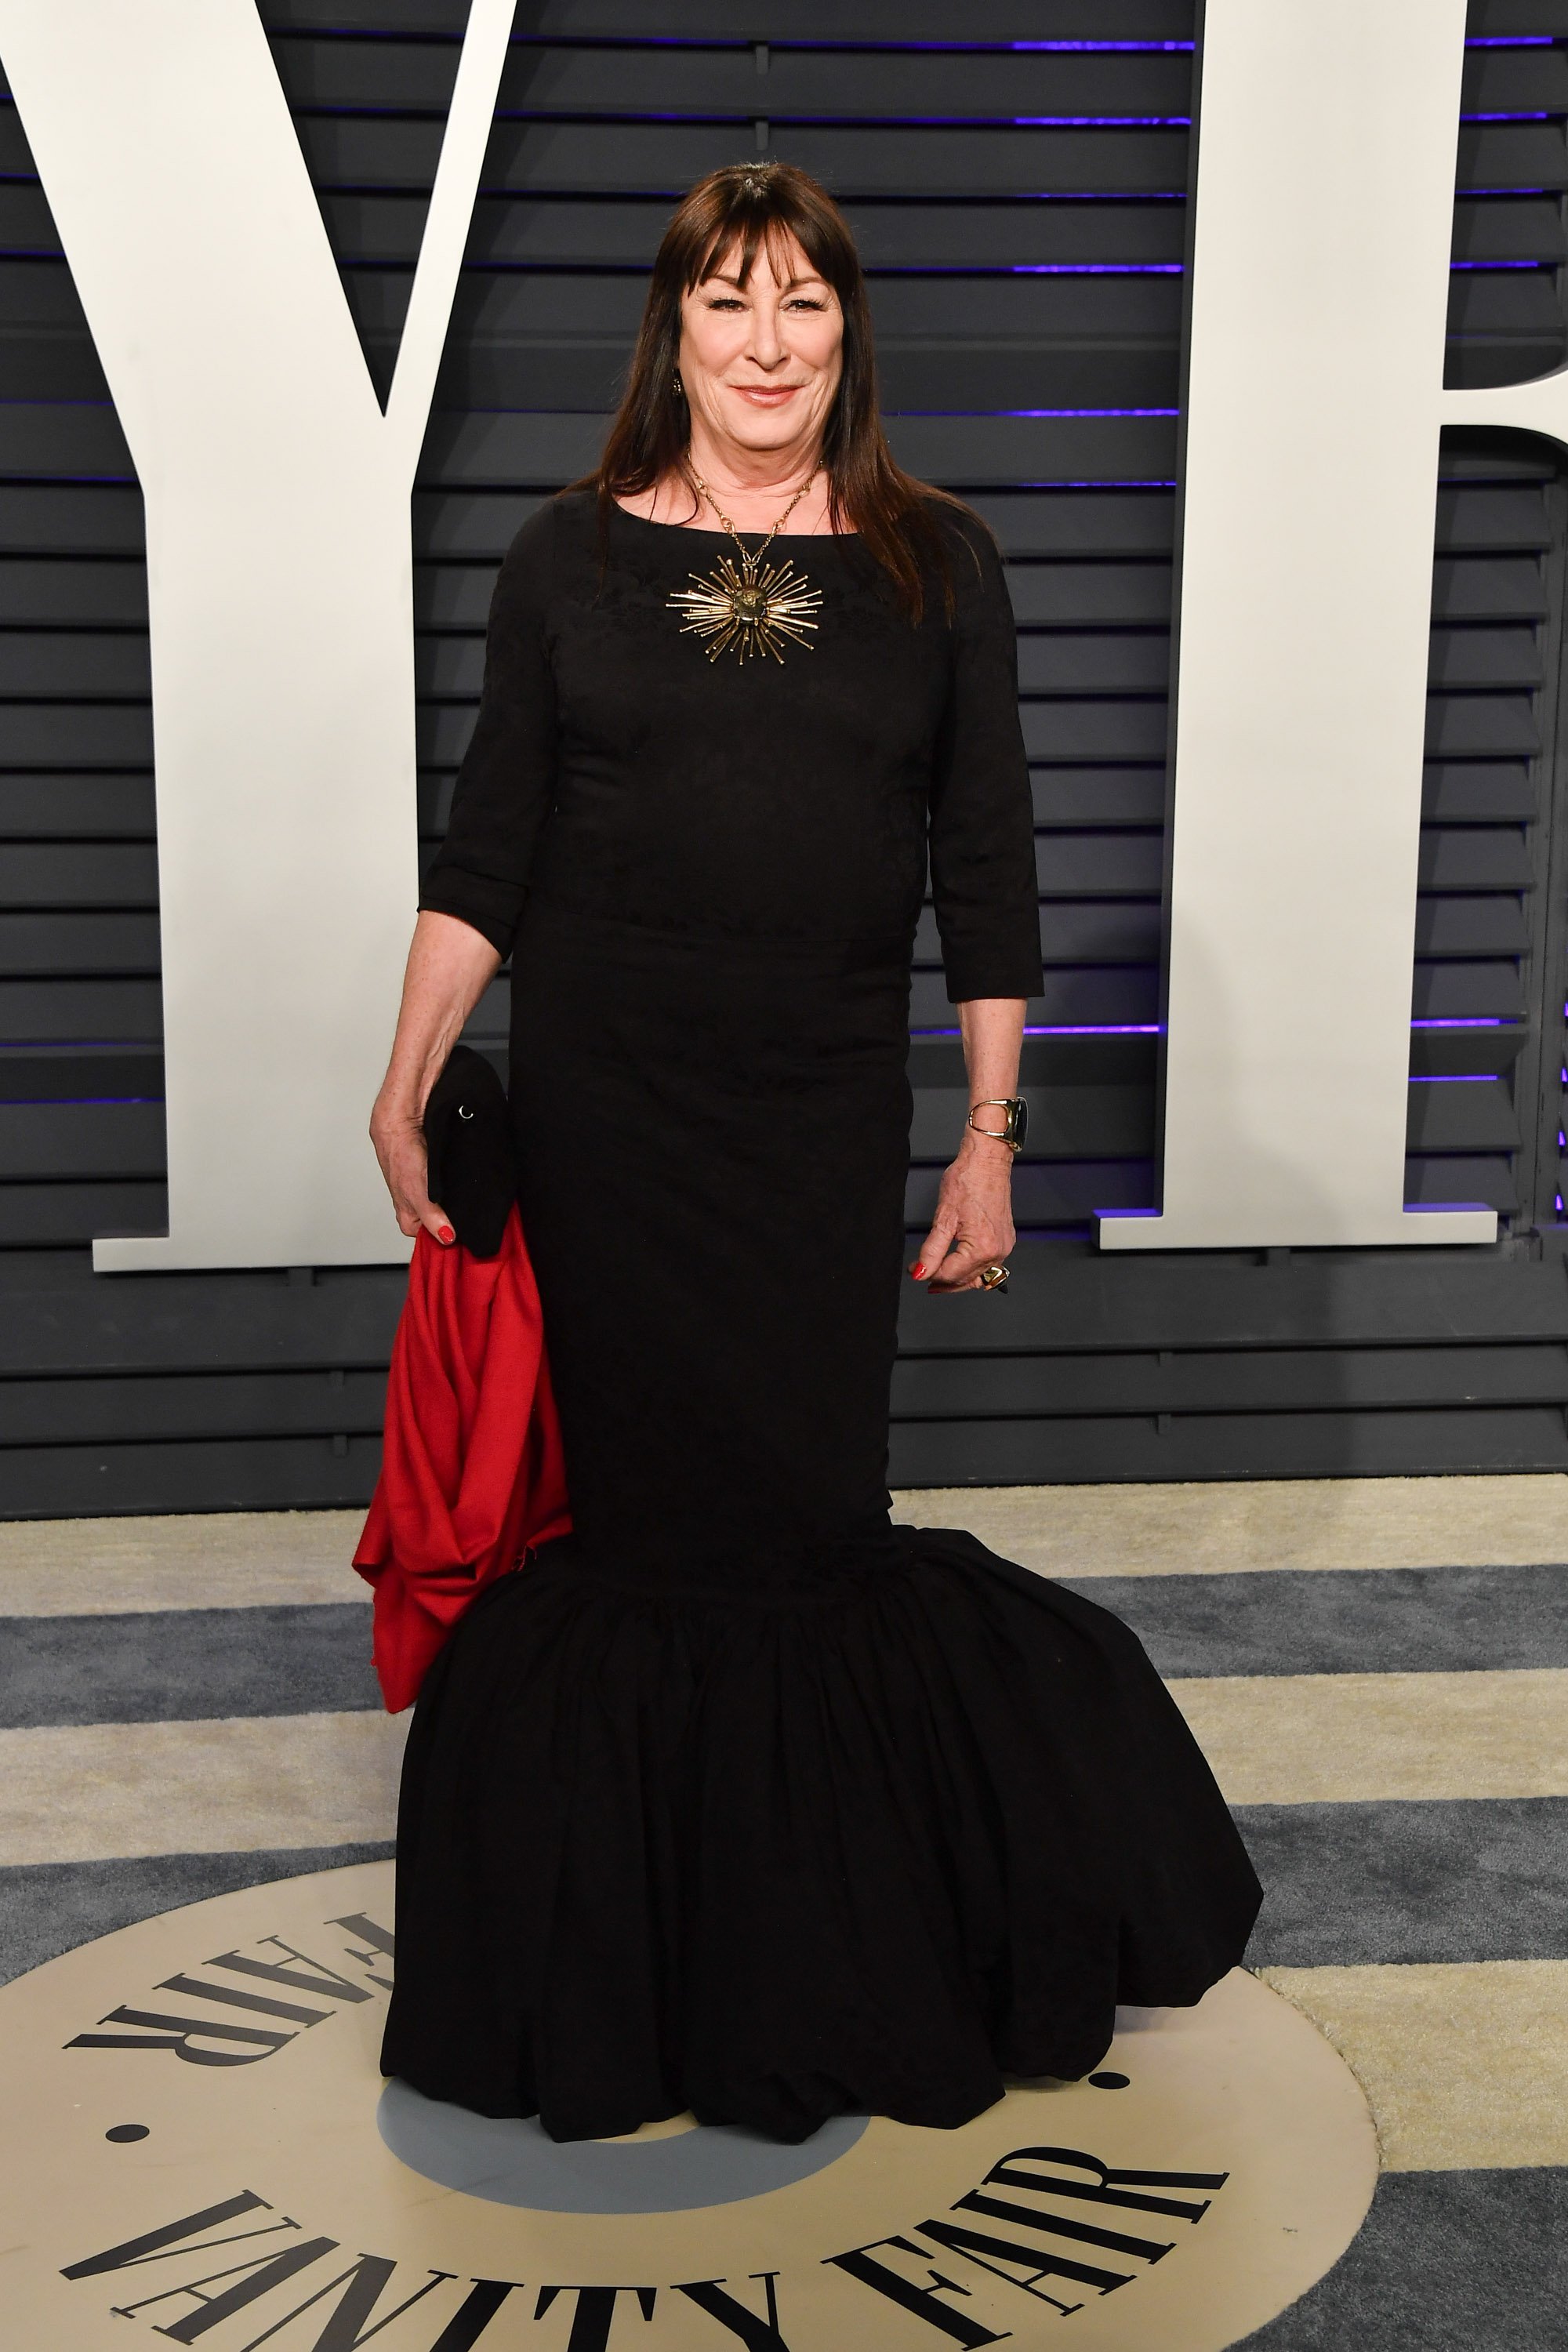 Anjelica Huston at the 2019 Vanity Fair Oscar Party hosted by Radhika Jones on February 24, 2019 in Beverly Hills, California | Photo: Getty Images